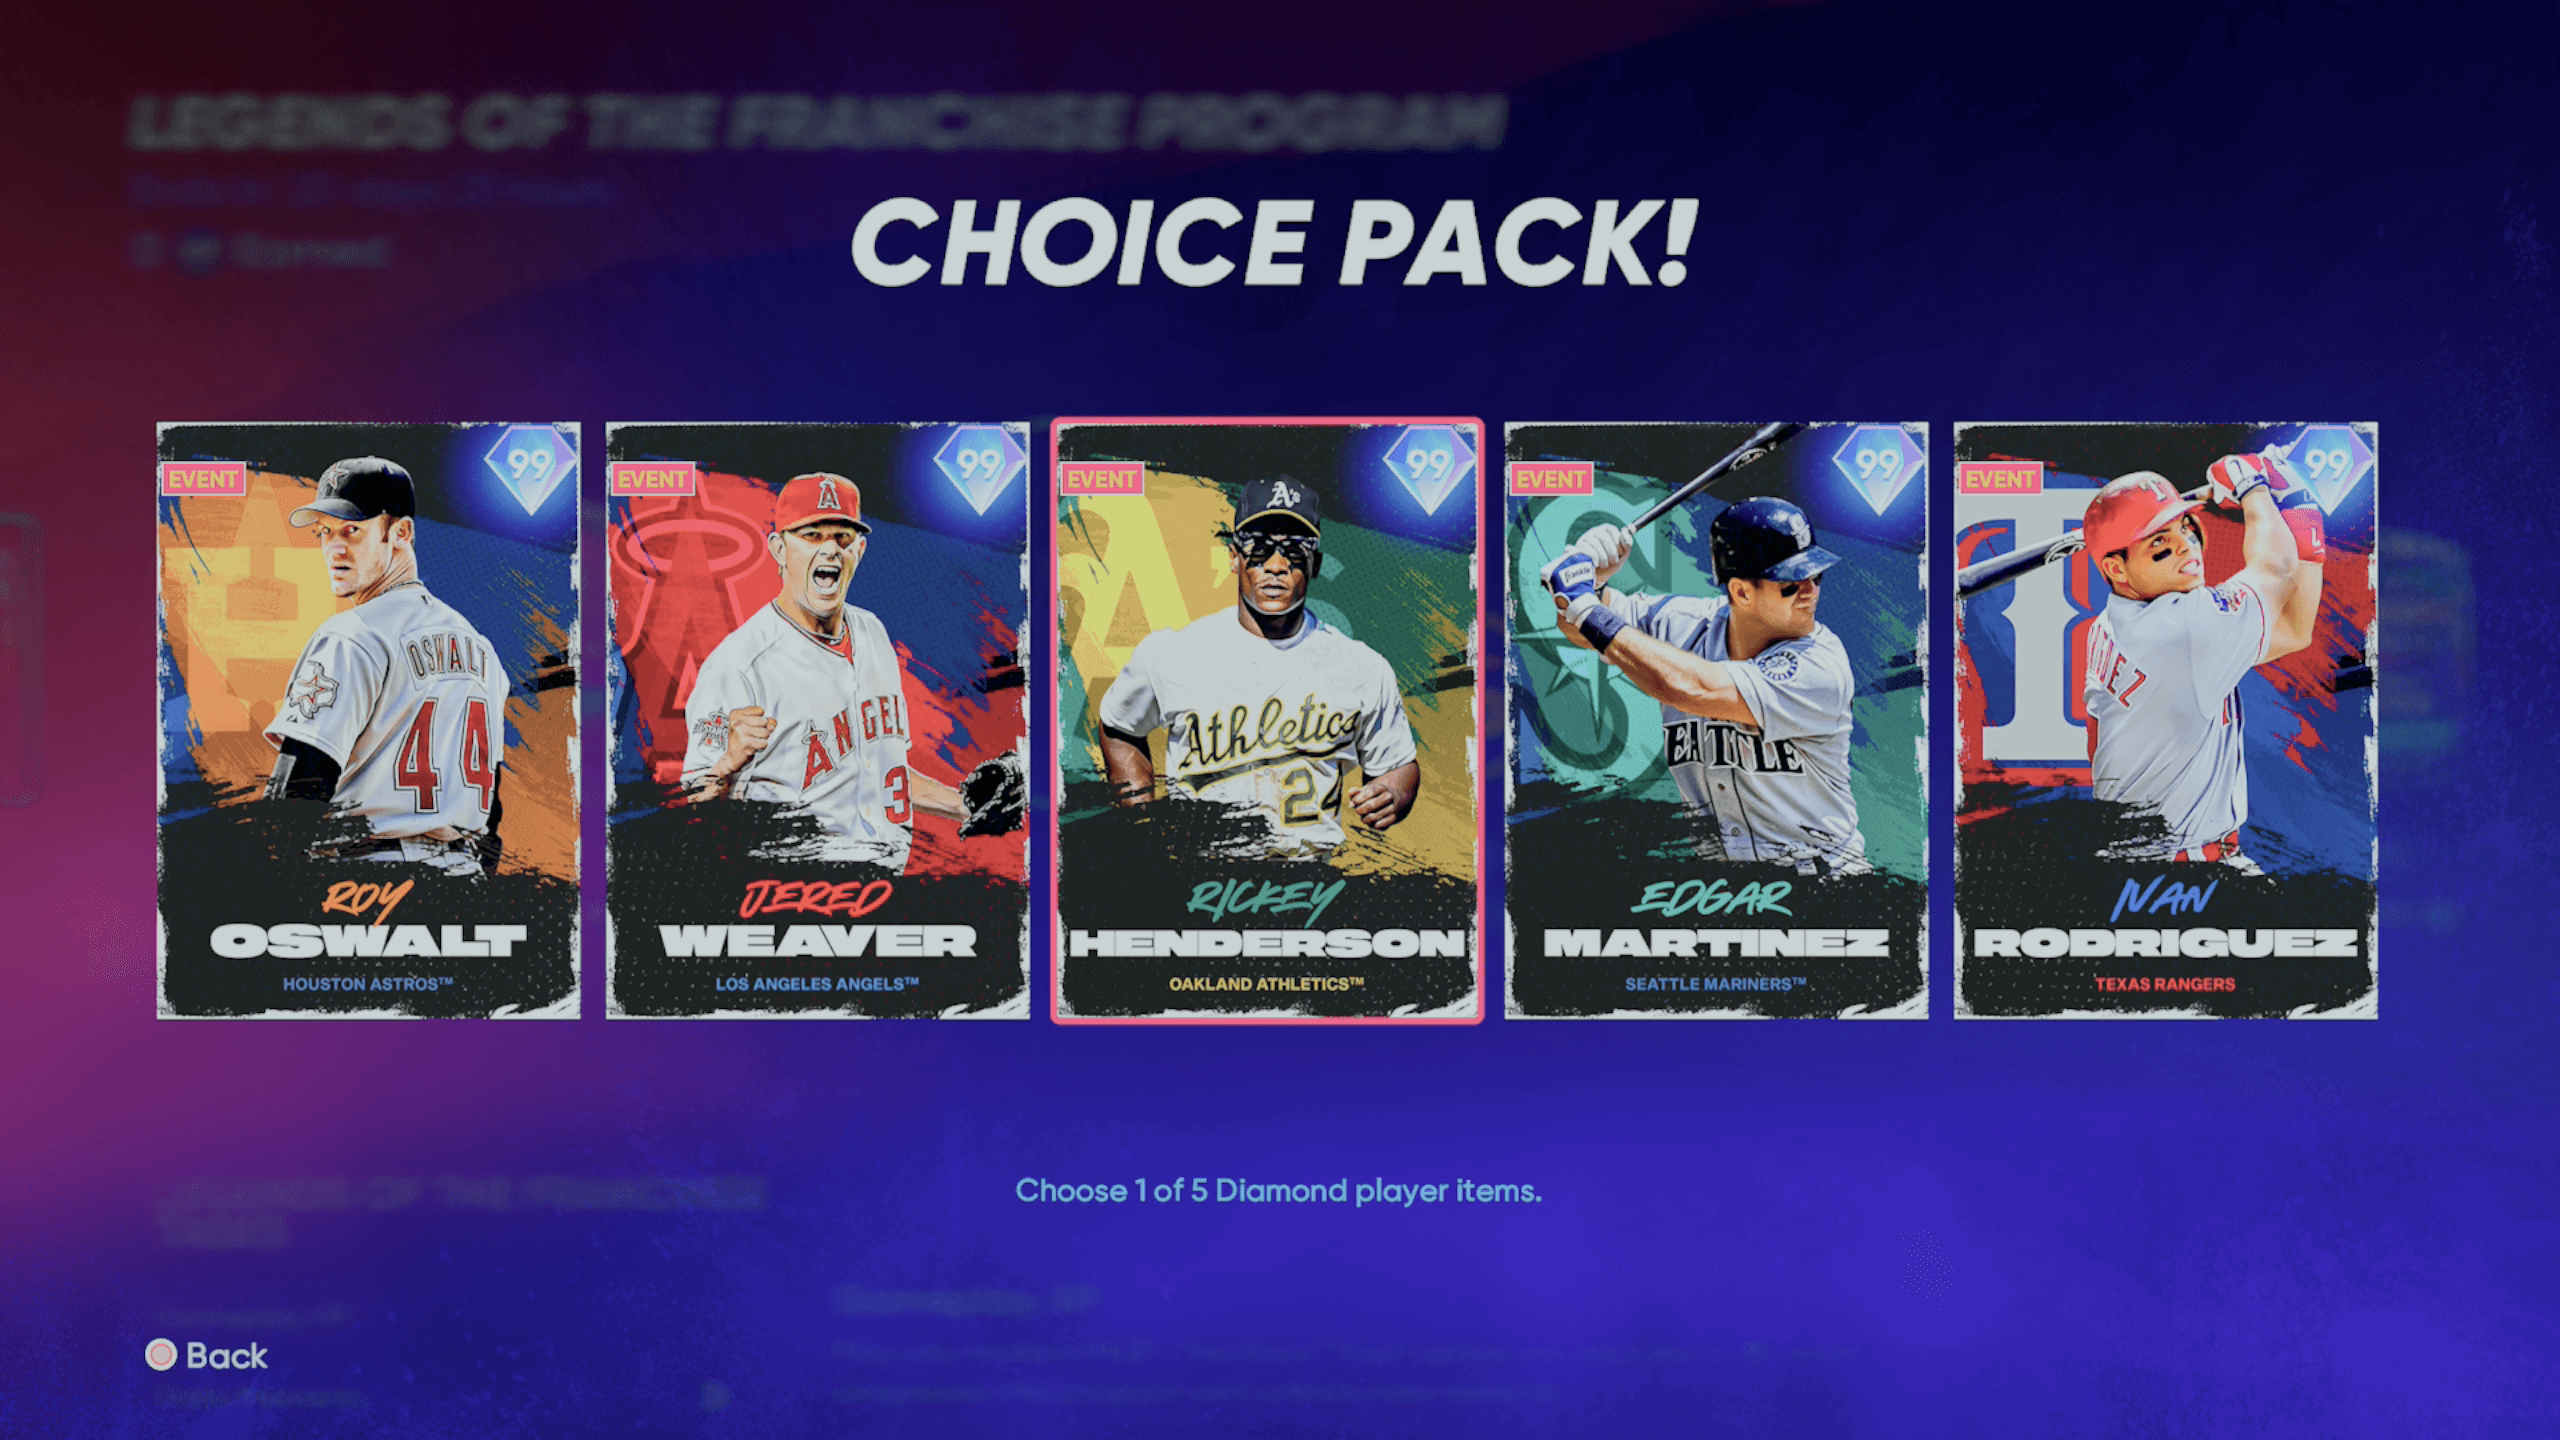 Ozzie Smith is one of the new legends in Takashi choice pack-set 2